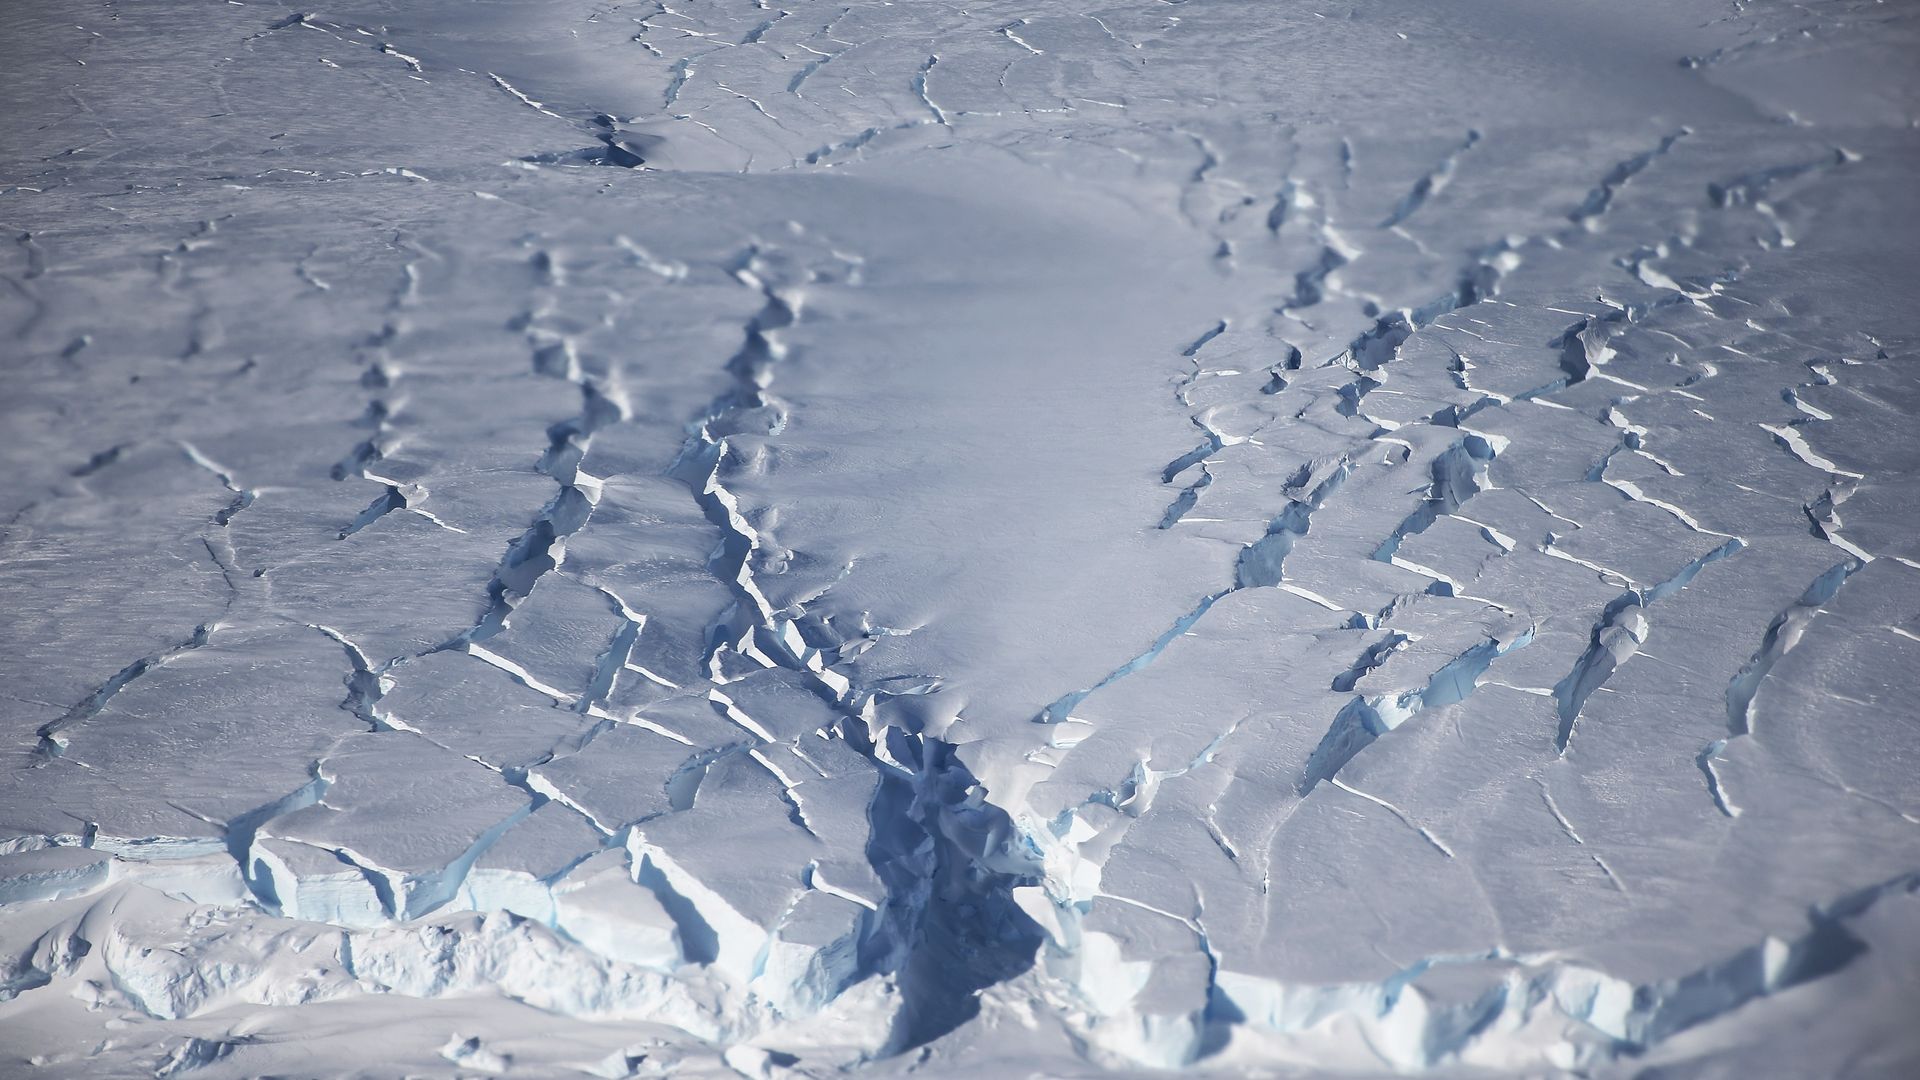 Part of the West Antarctic Ice Sheet viewed from above.